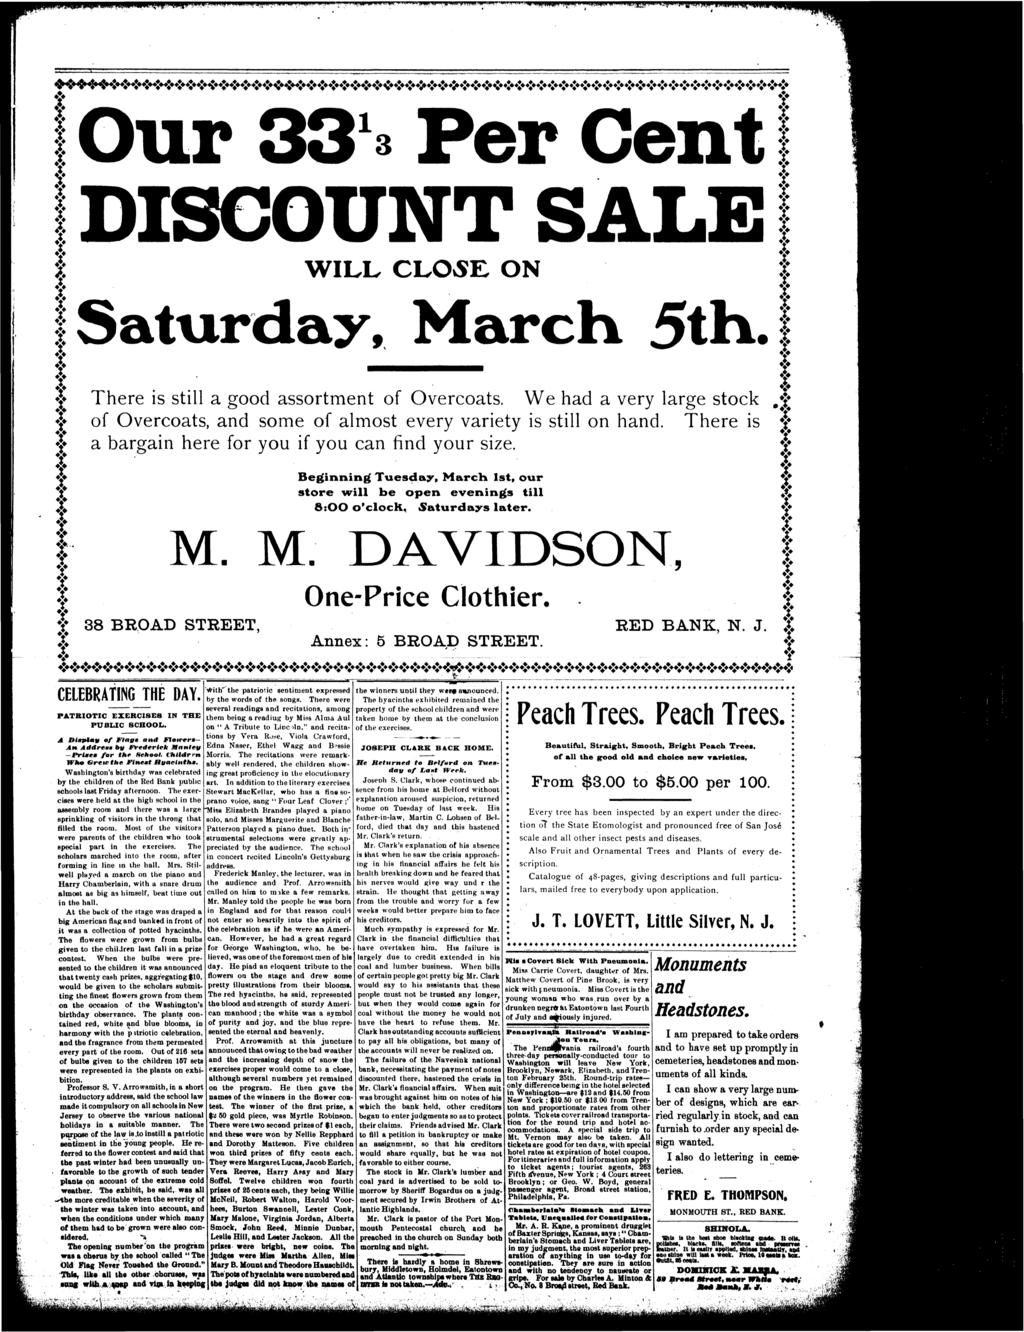 * y $ J * X t t Our 33 1 3 Cent t DSCOUN SALE WLL CLOSE ON Saturday, March 5th.